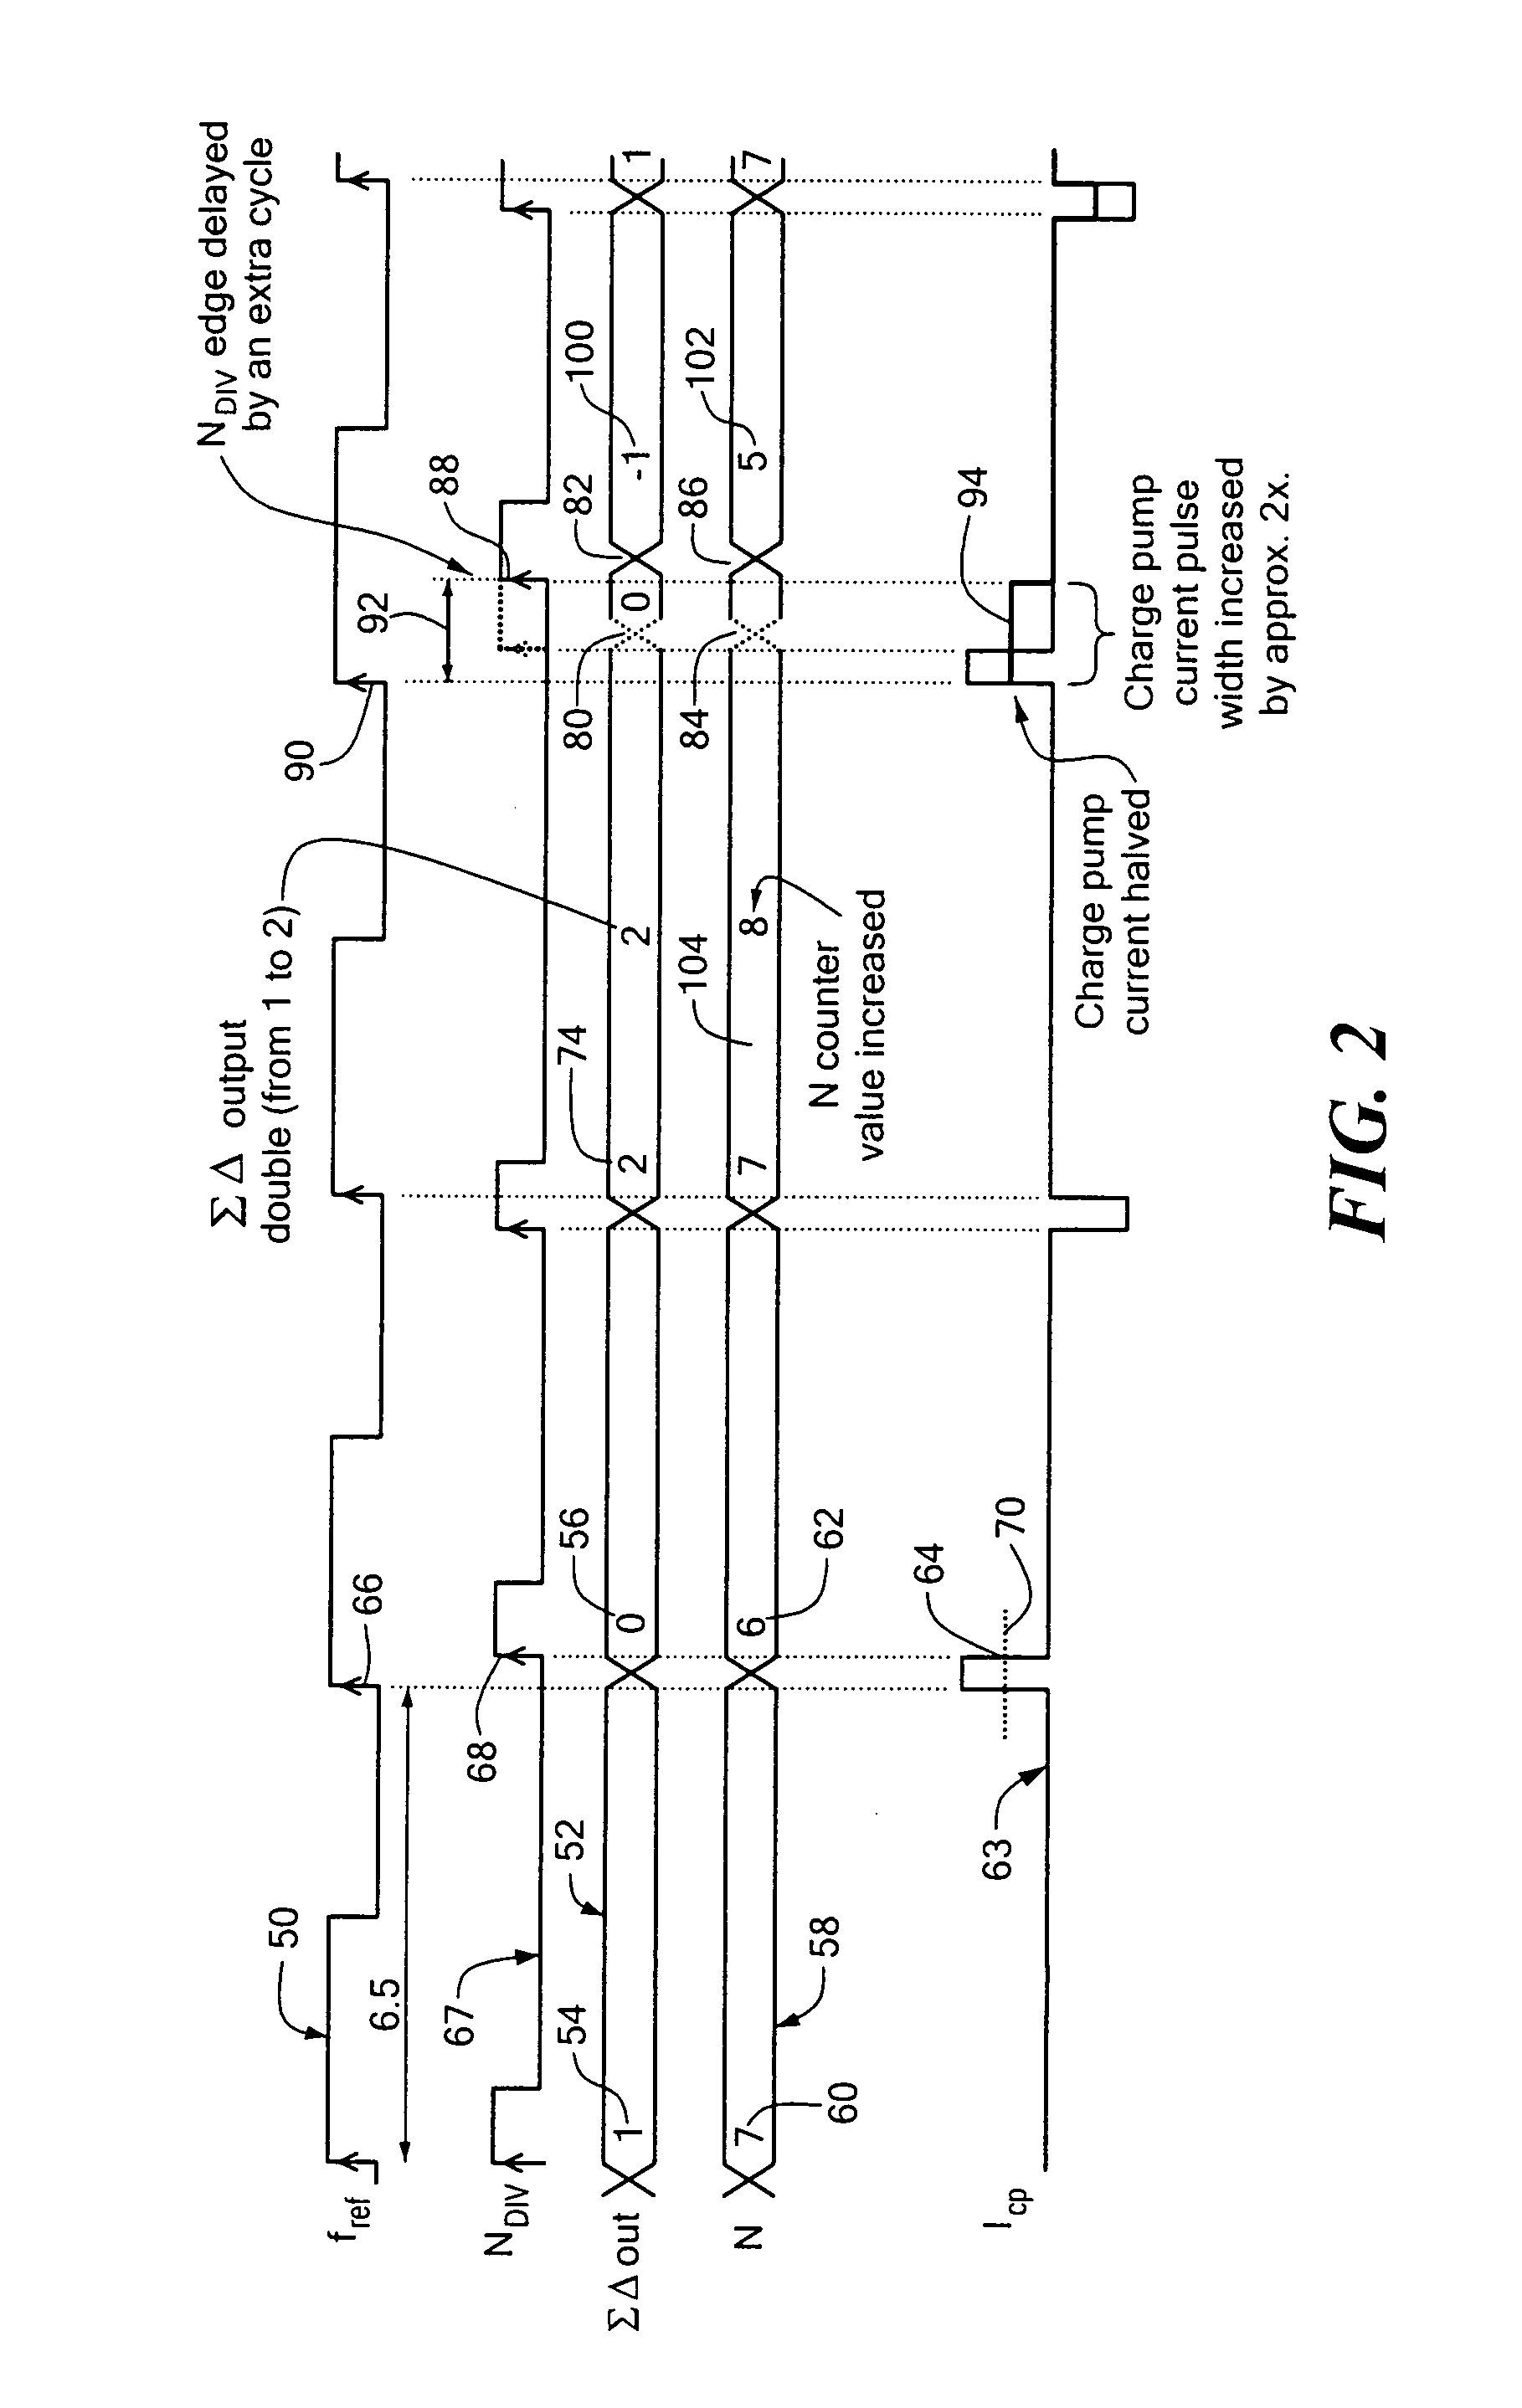 Gain compensated fractional-N phase lock loop system and method